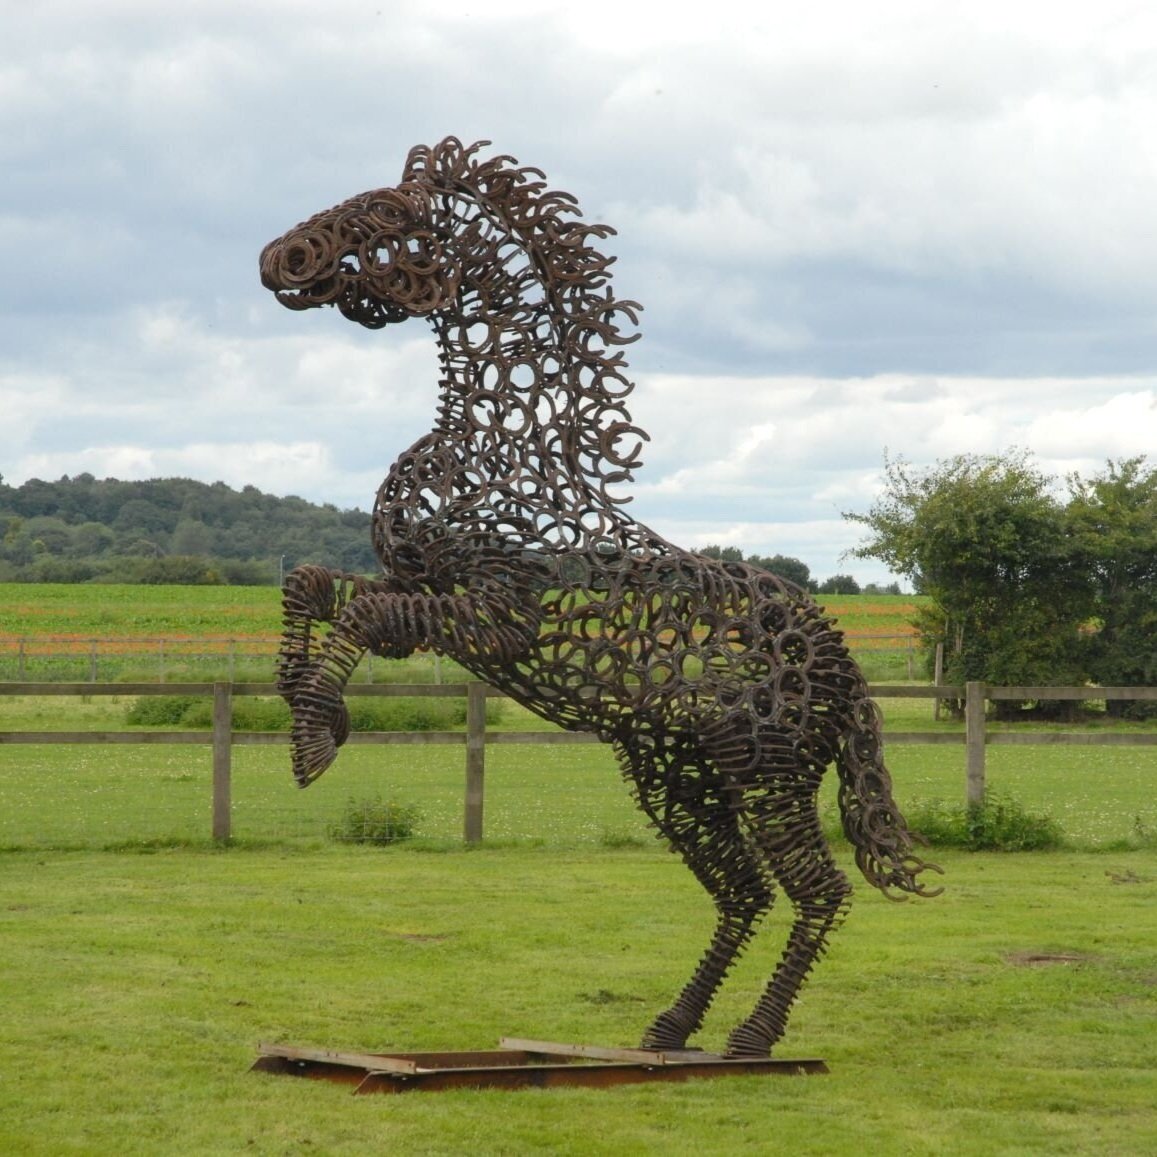 Rearing Horse Sculpture, made from horseshoes